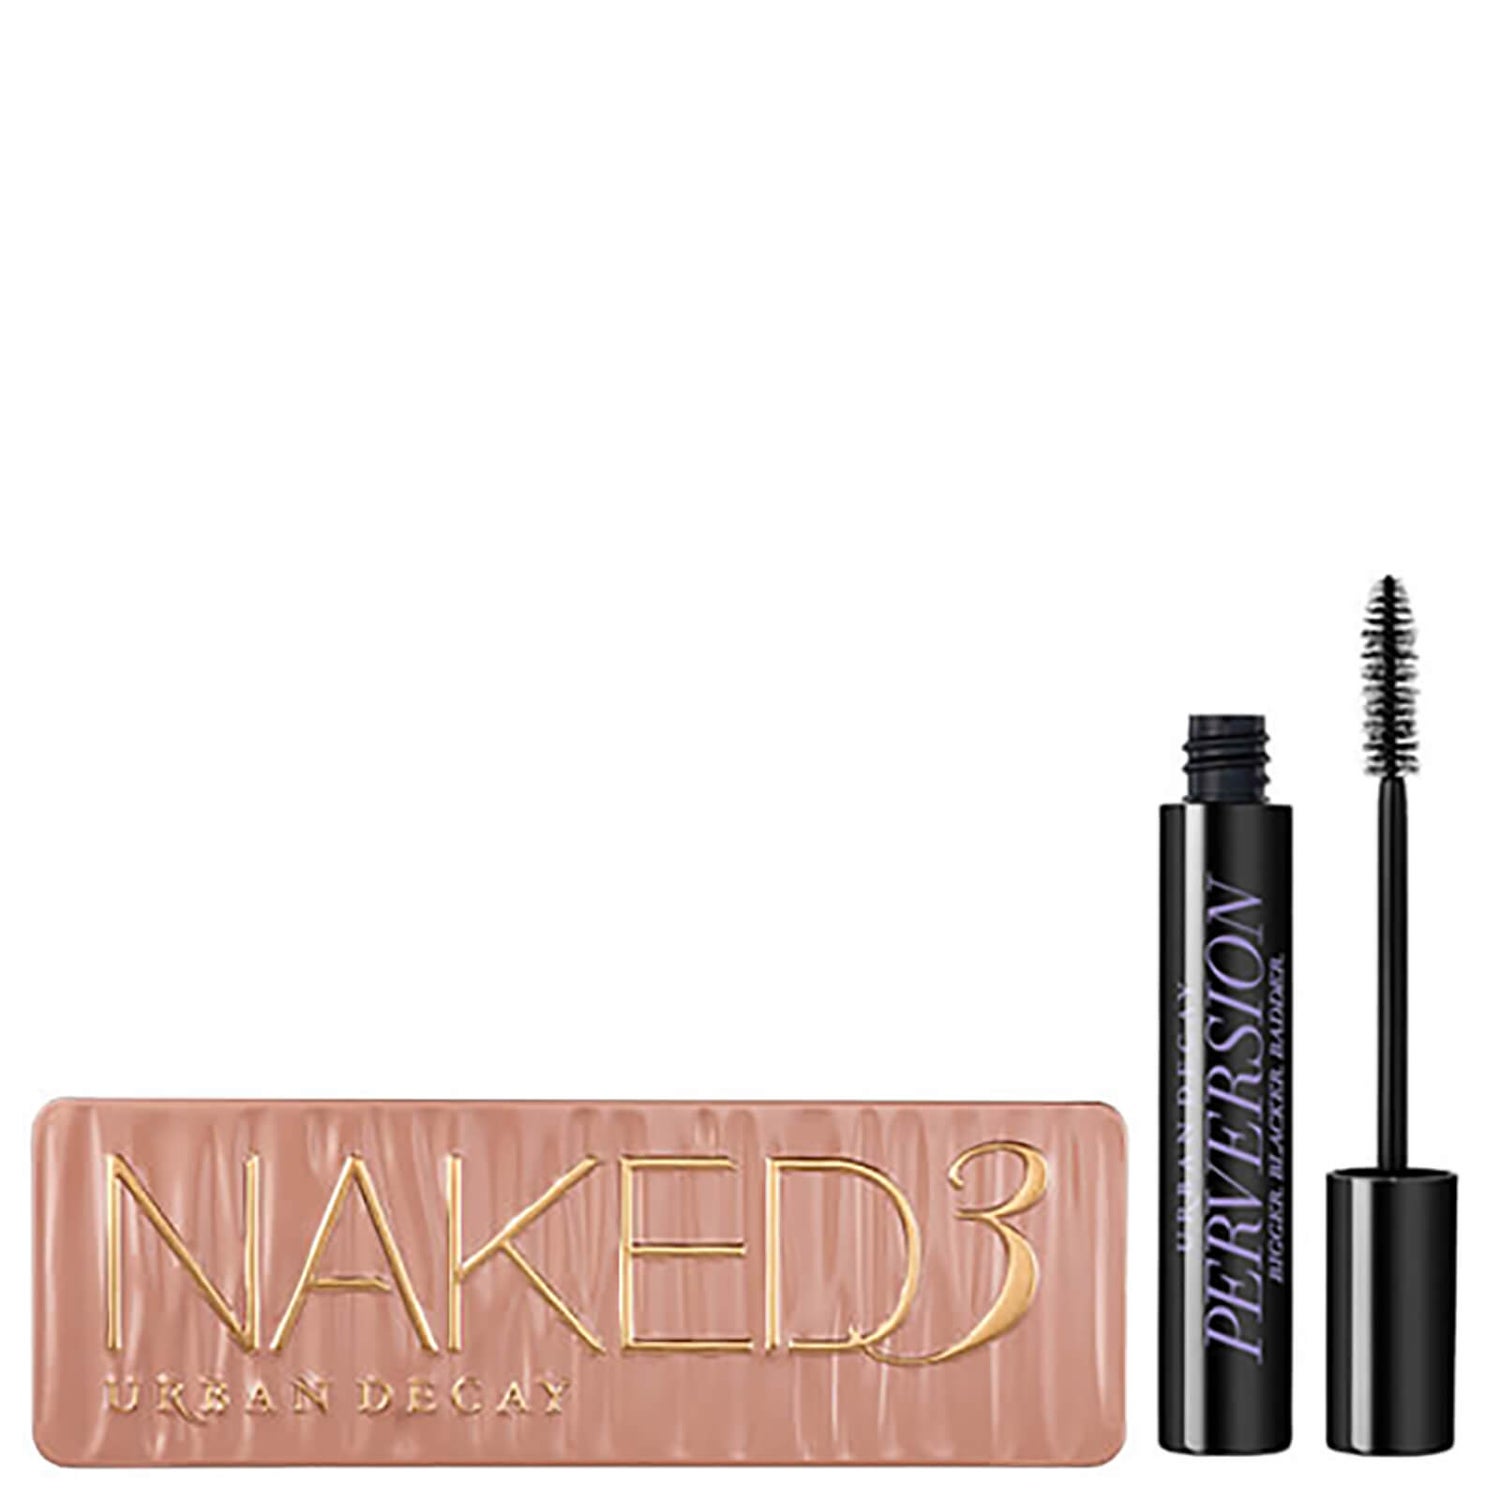 Urban Decay Naked 3 Palette and Mascara Bundle